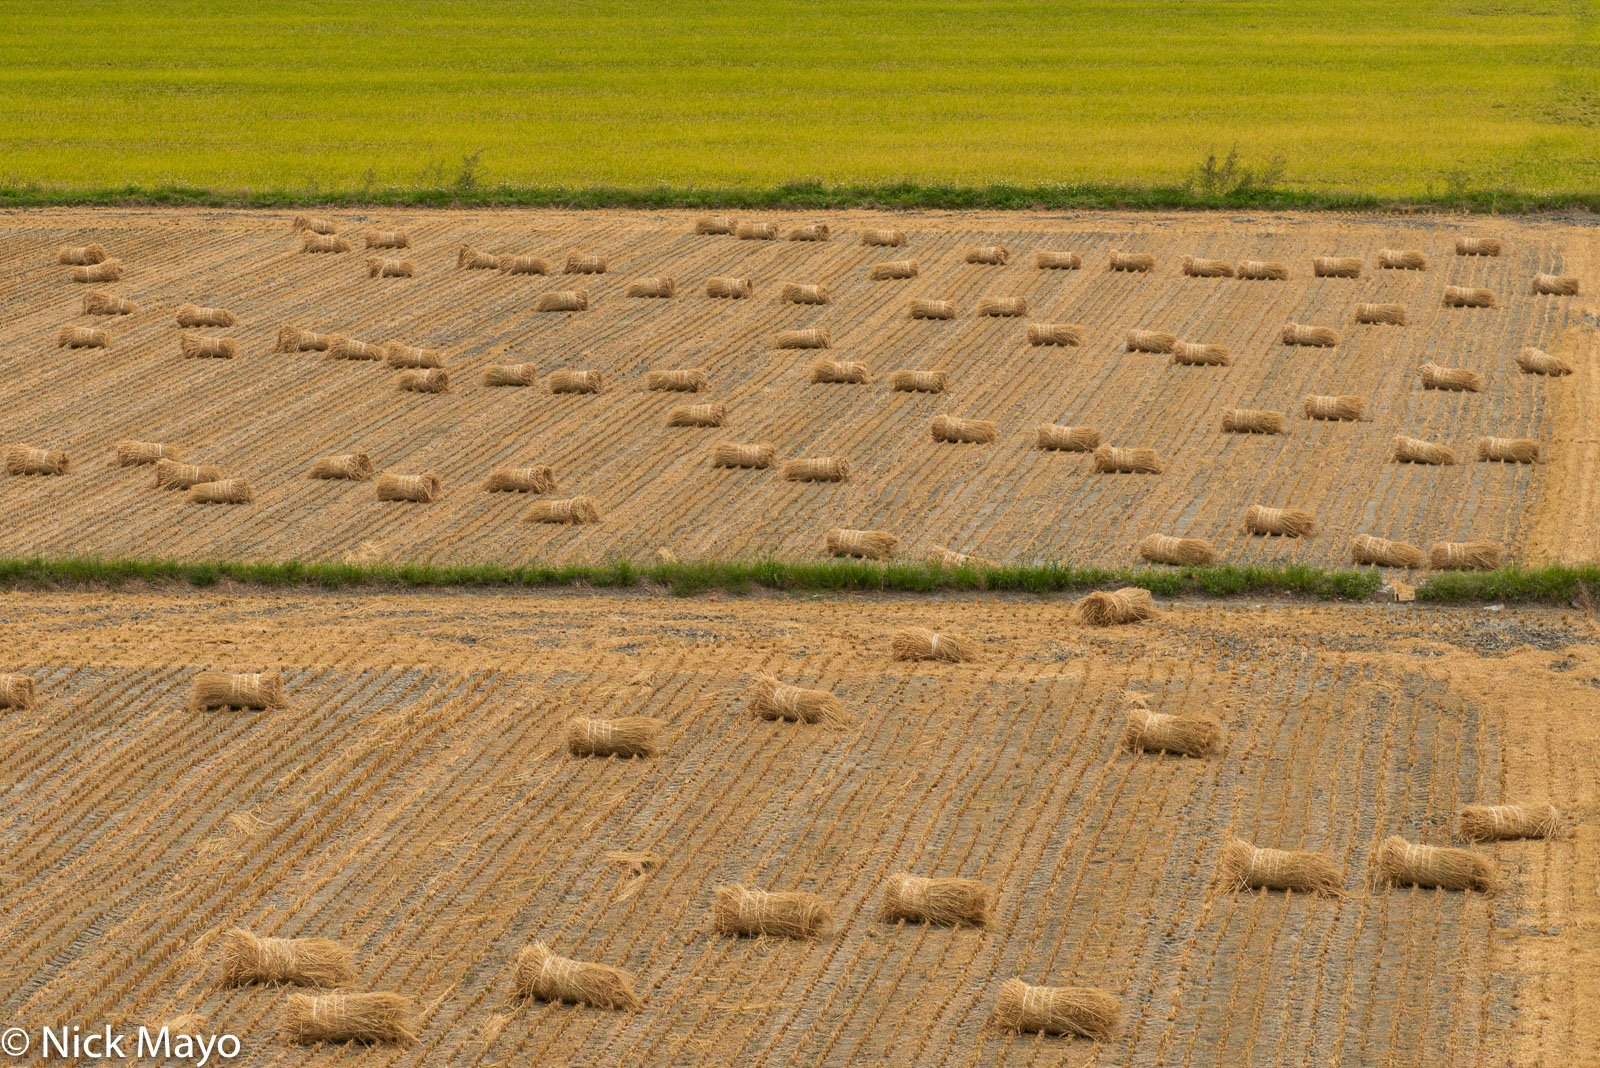 Baled rice straw in dry paddy fields at Haiduan in Taitung County.